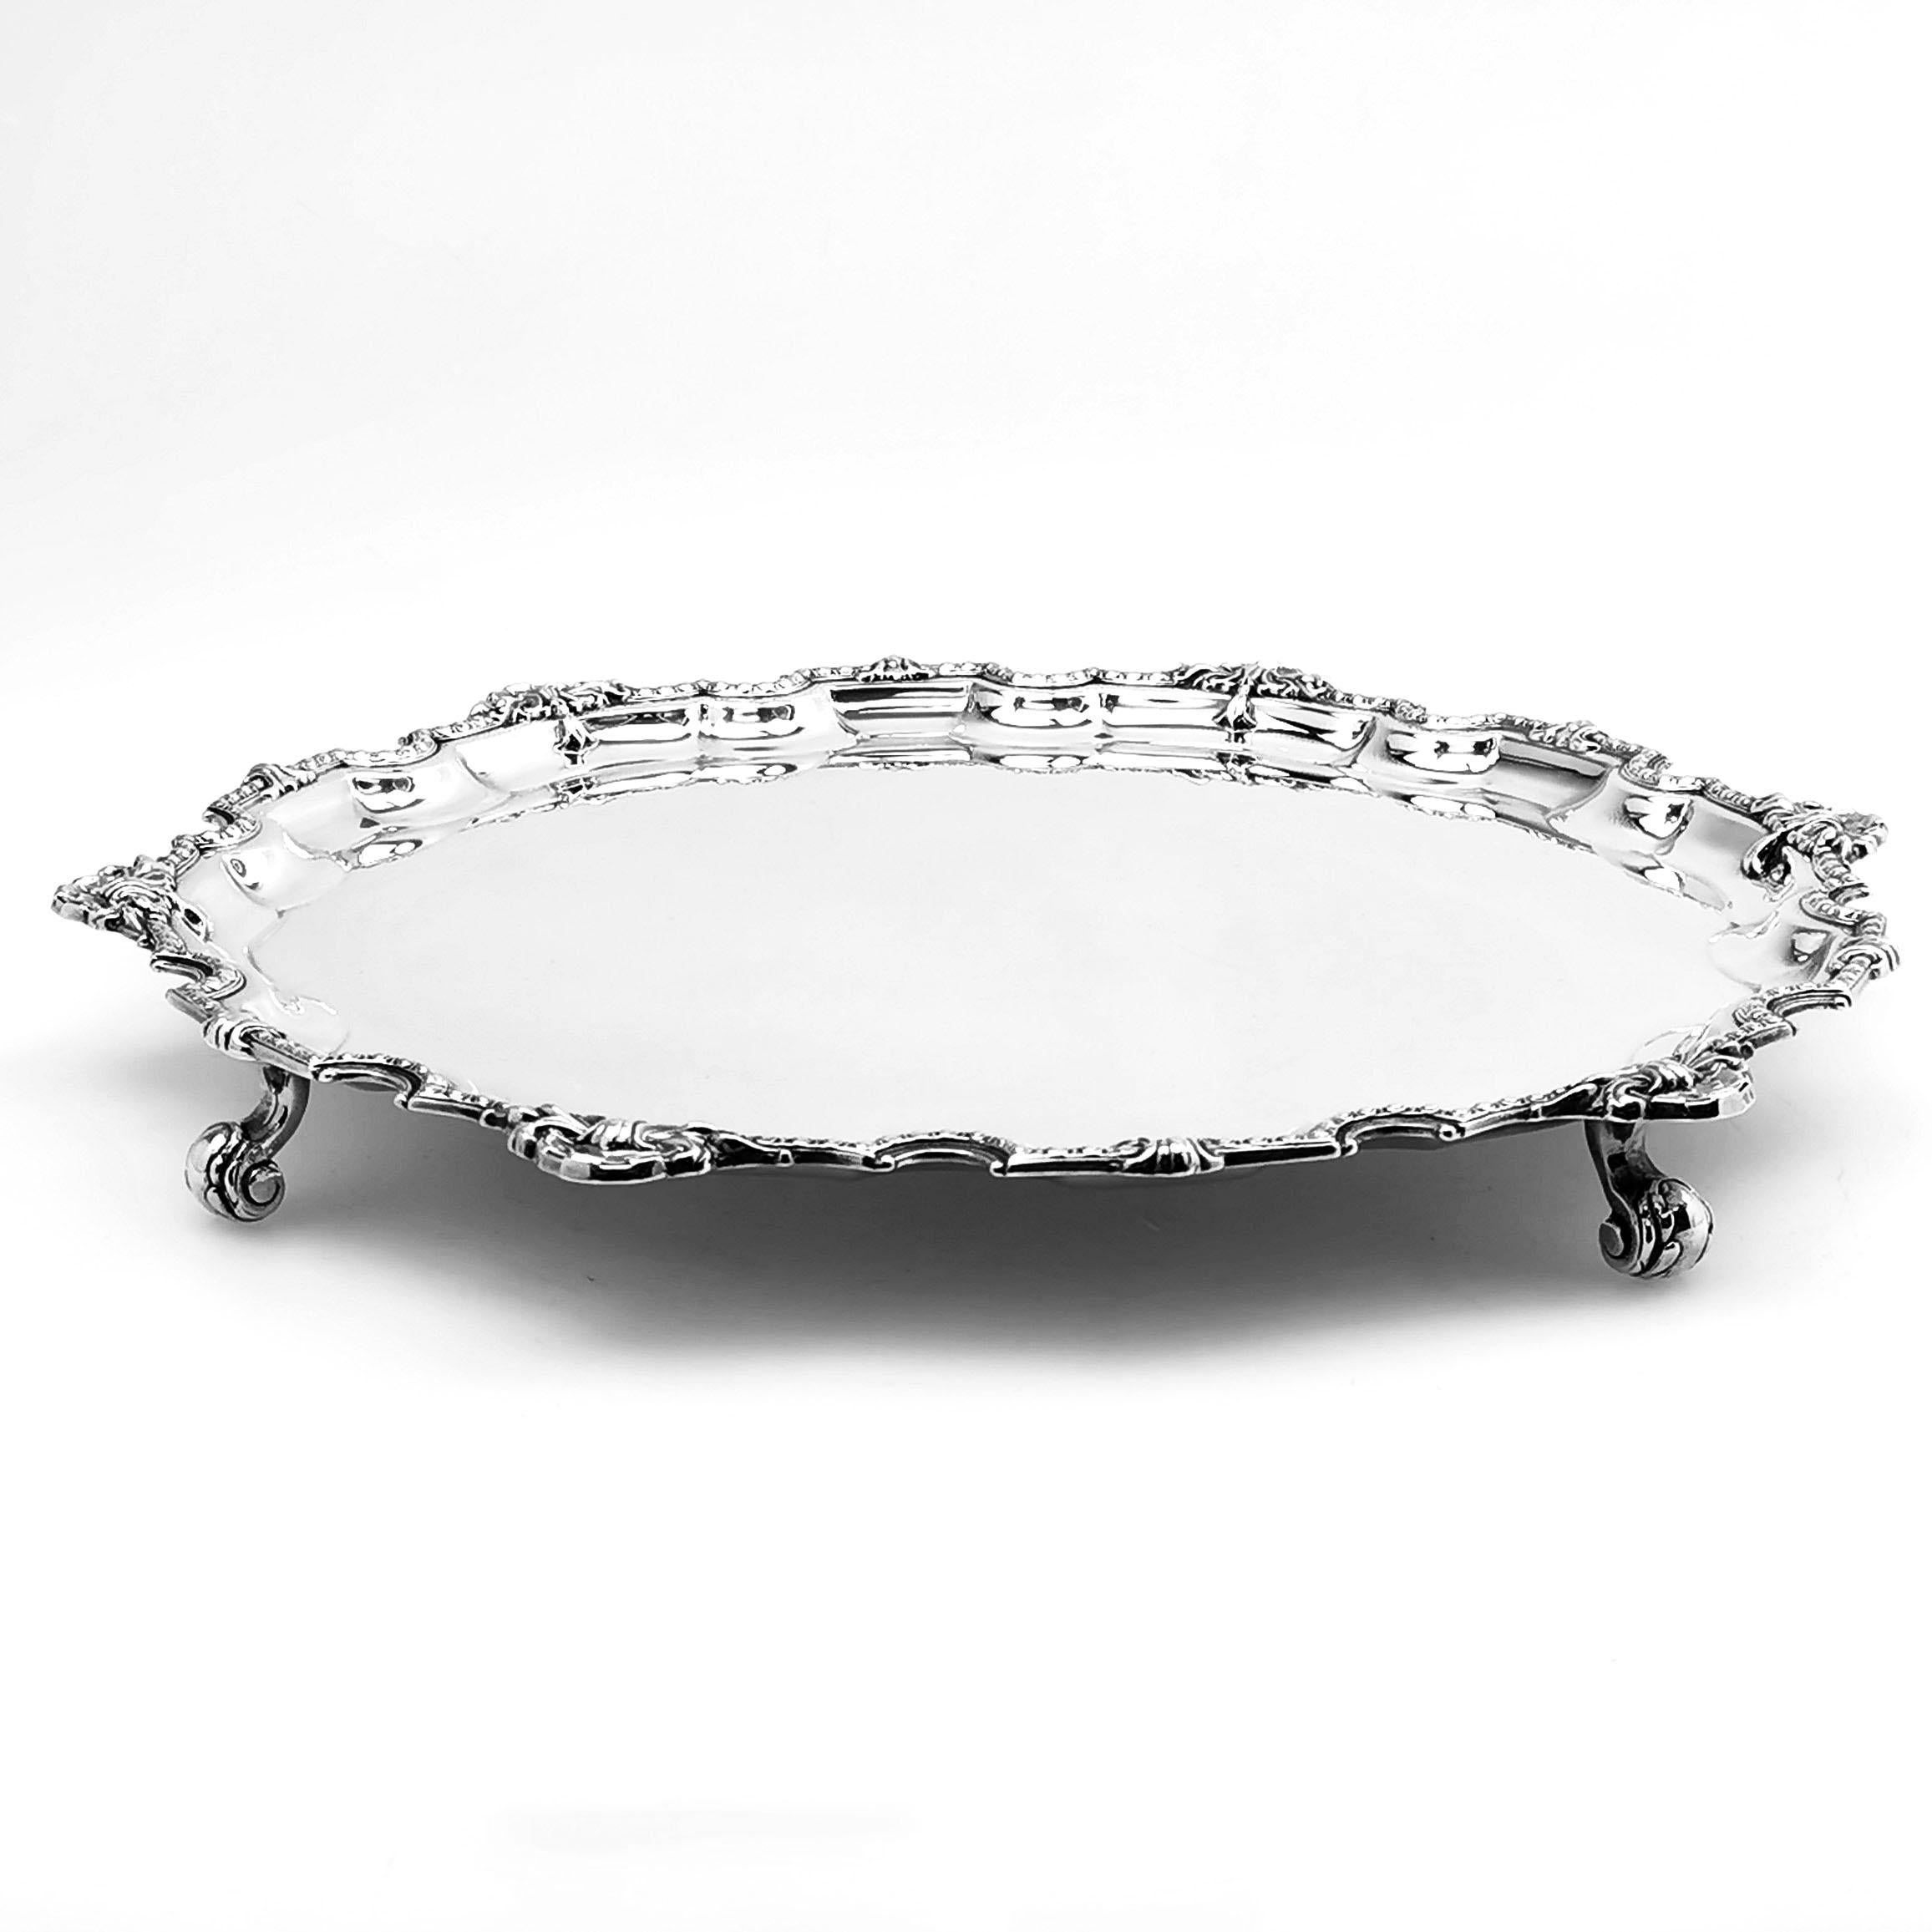 A classic solid silver Salver with an elegant shell and bead border and standing on three acanthus leaf topped scroll feet. This Salver is suitable for engraving if desired.

Made in Sheffield in 1966.

Approx. Weight - 1100g / 36oz
Approx. Diameter